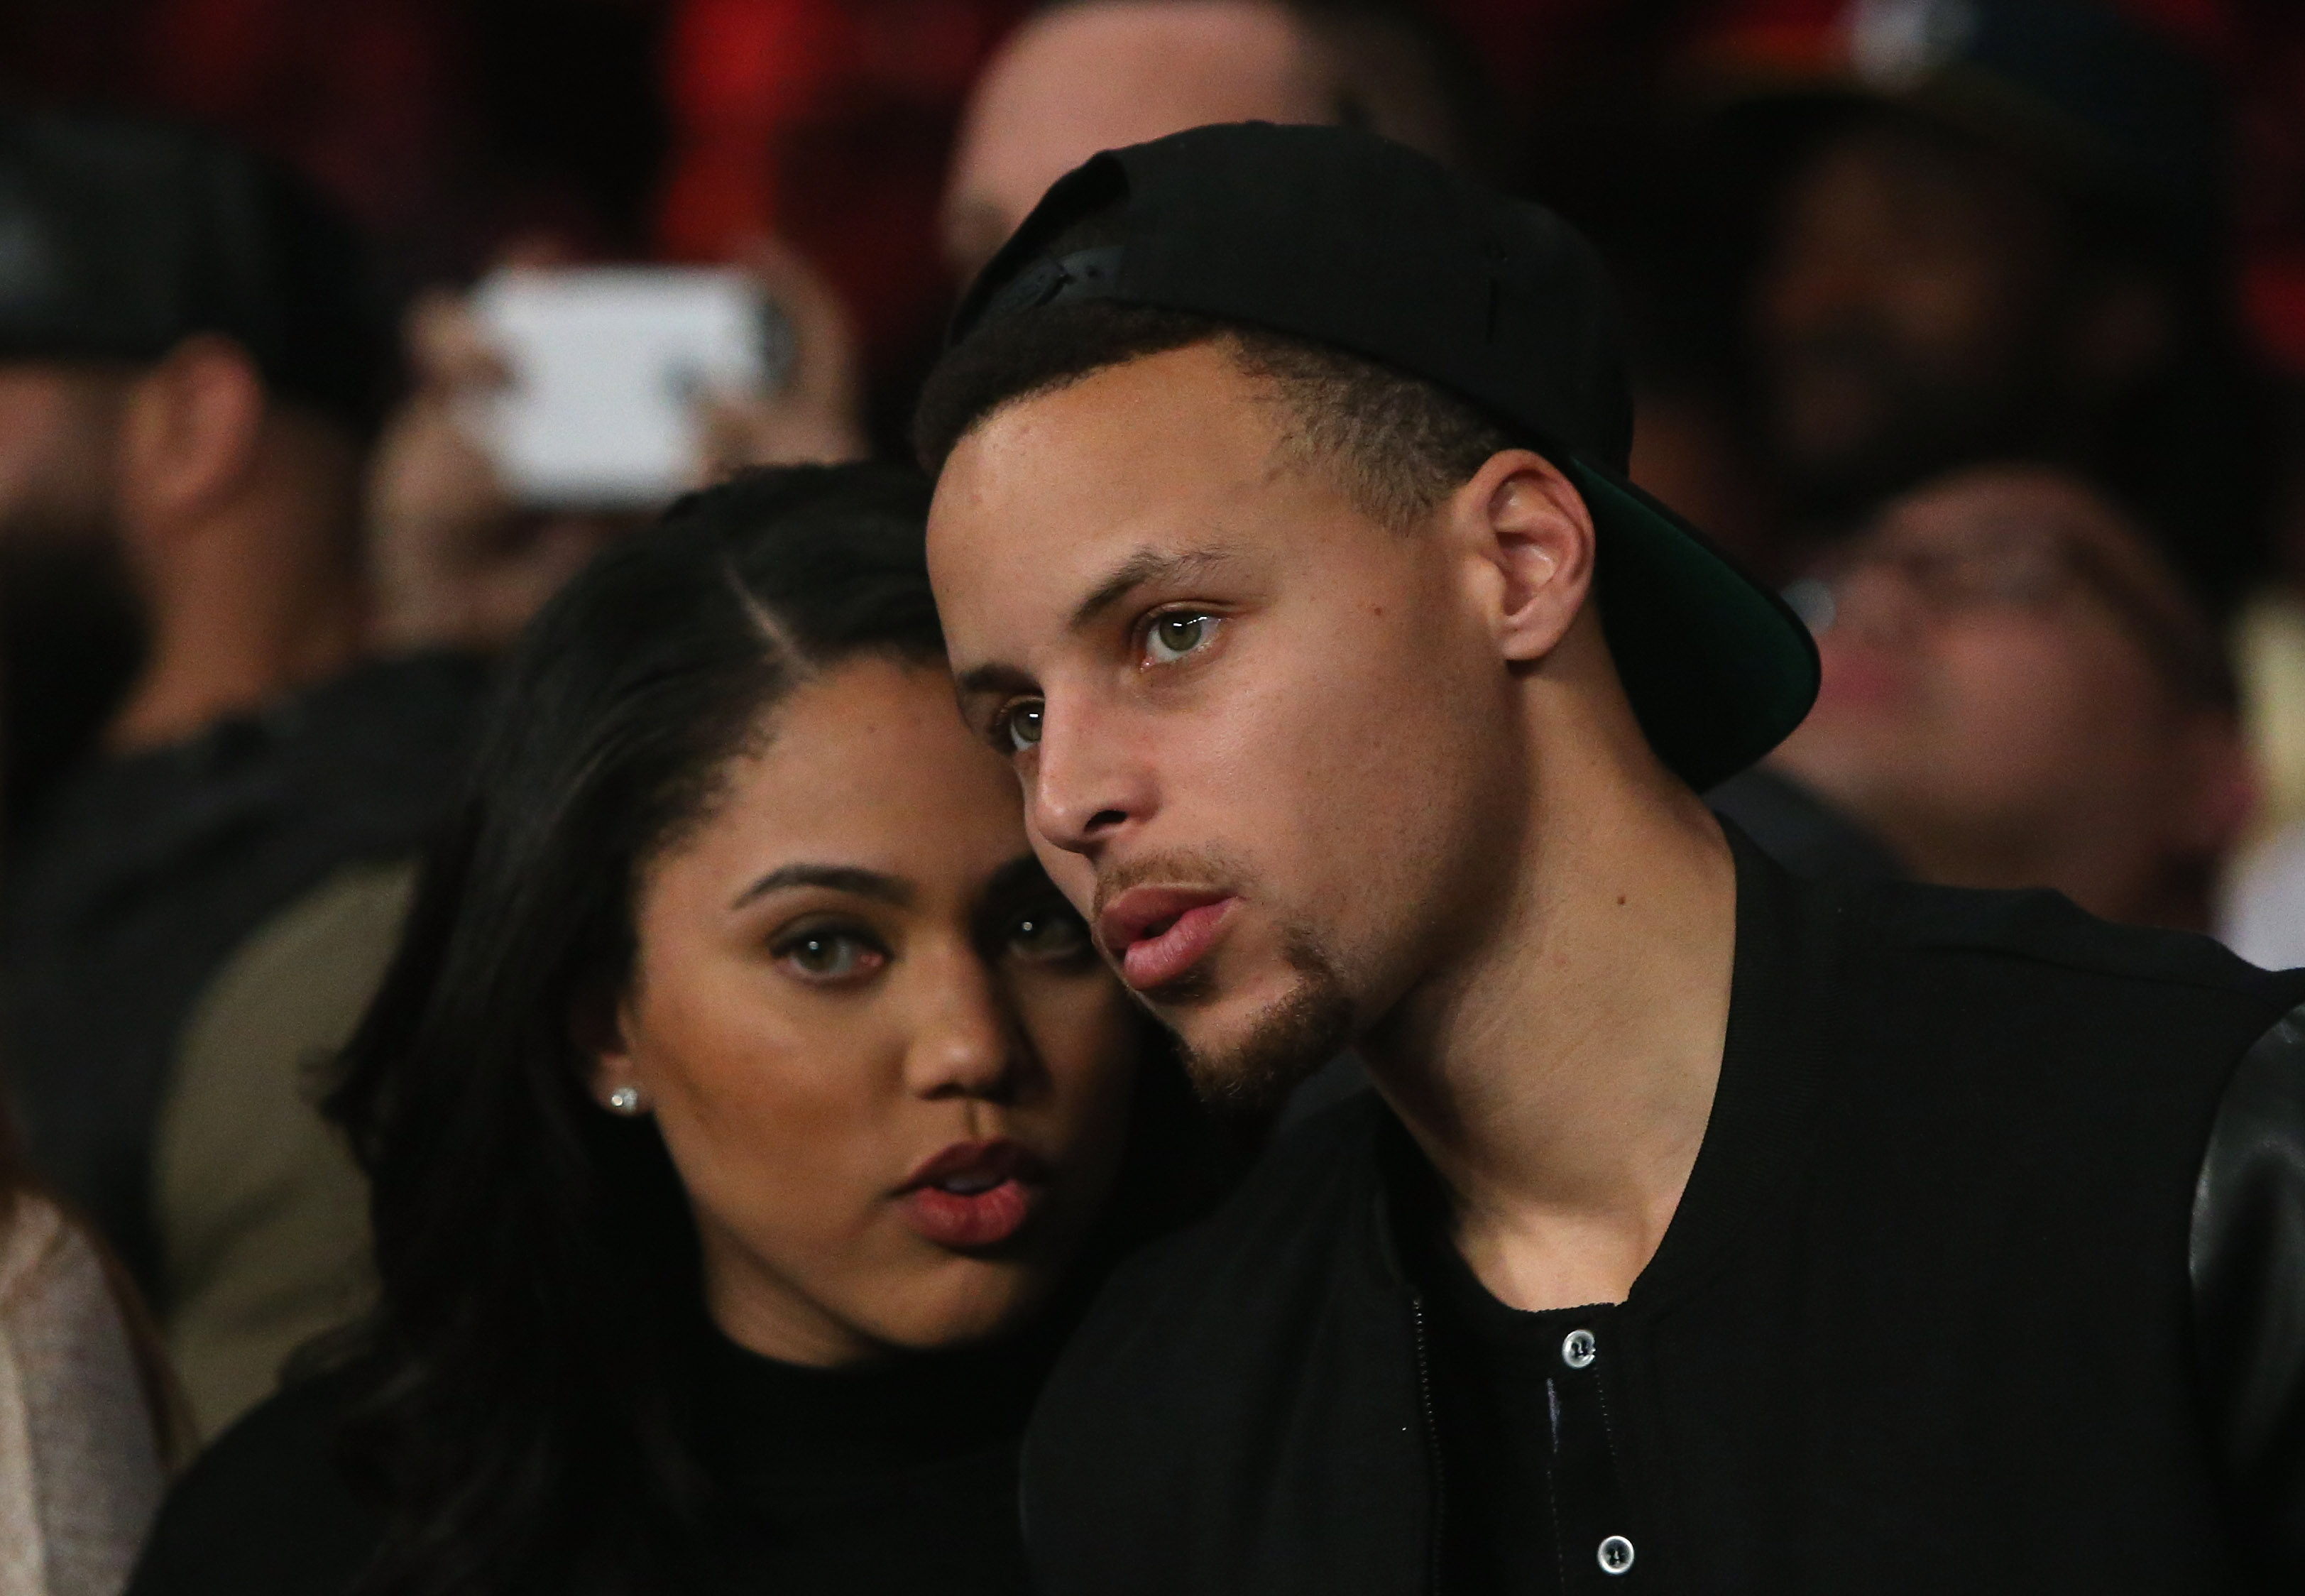 Stephen Curry of the Golden State Warriors and his wife Ayesha attend the Andre Ward fight against Sullivan Barrera in their IBF Light Heavyweight bout at ORACLE Arena on March 26, 2016, in Oakland, Calif. (Ezra Shaw—Getty Images)